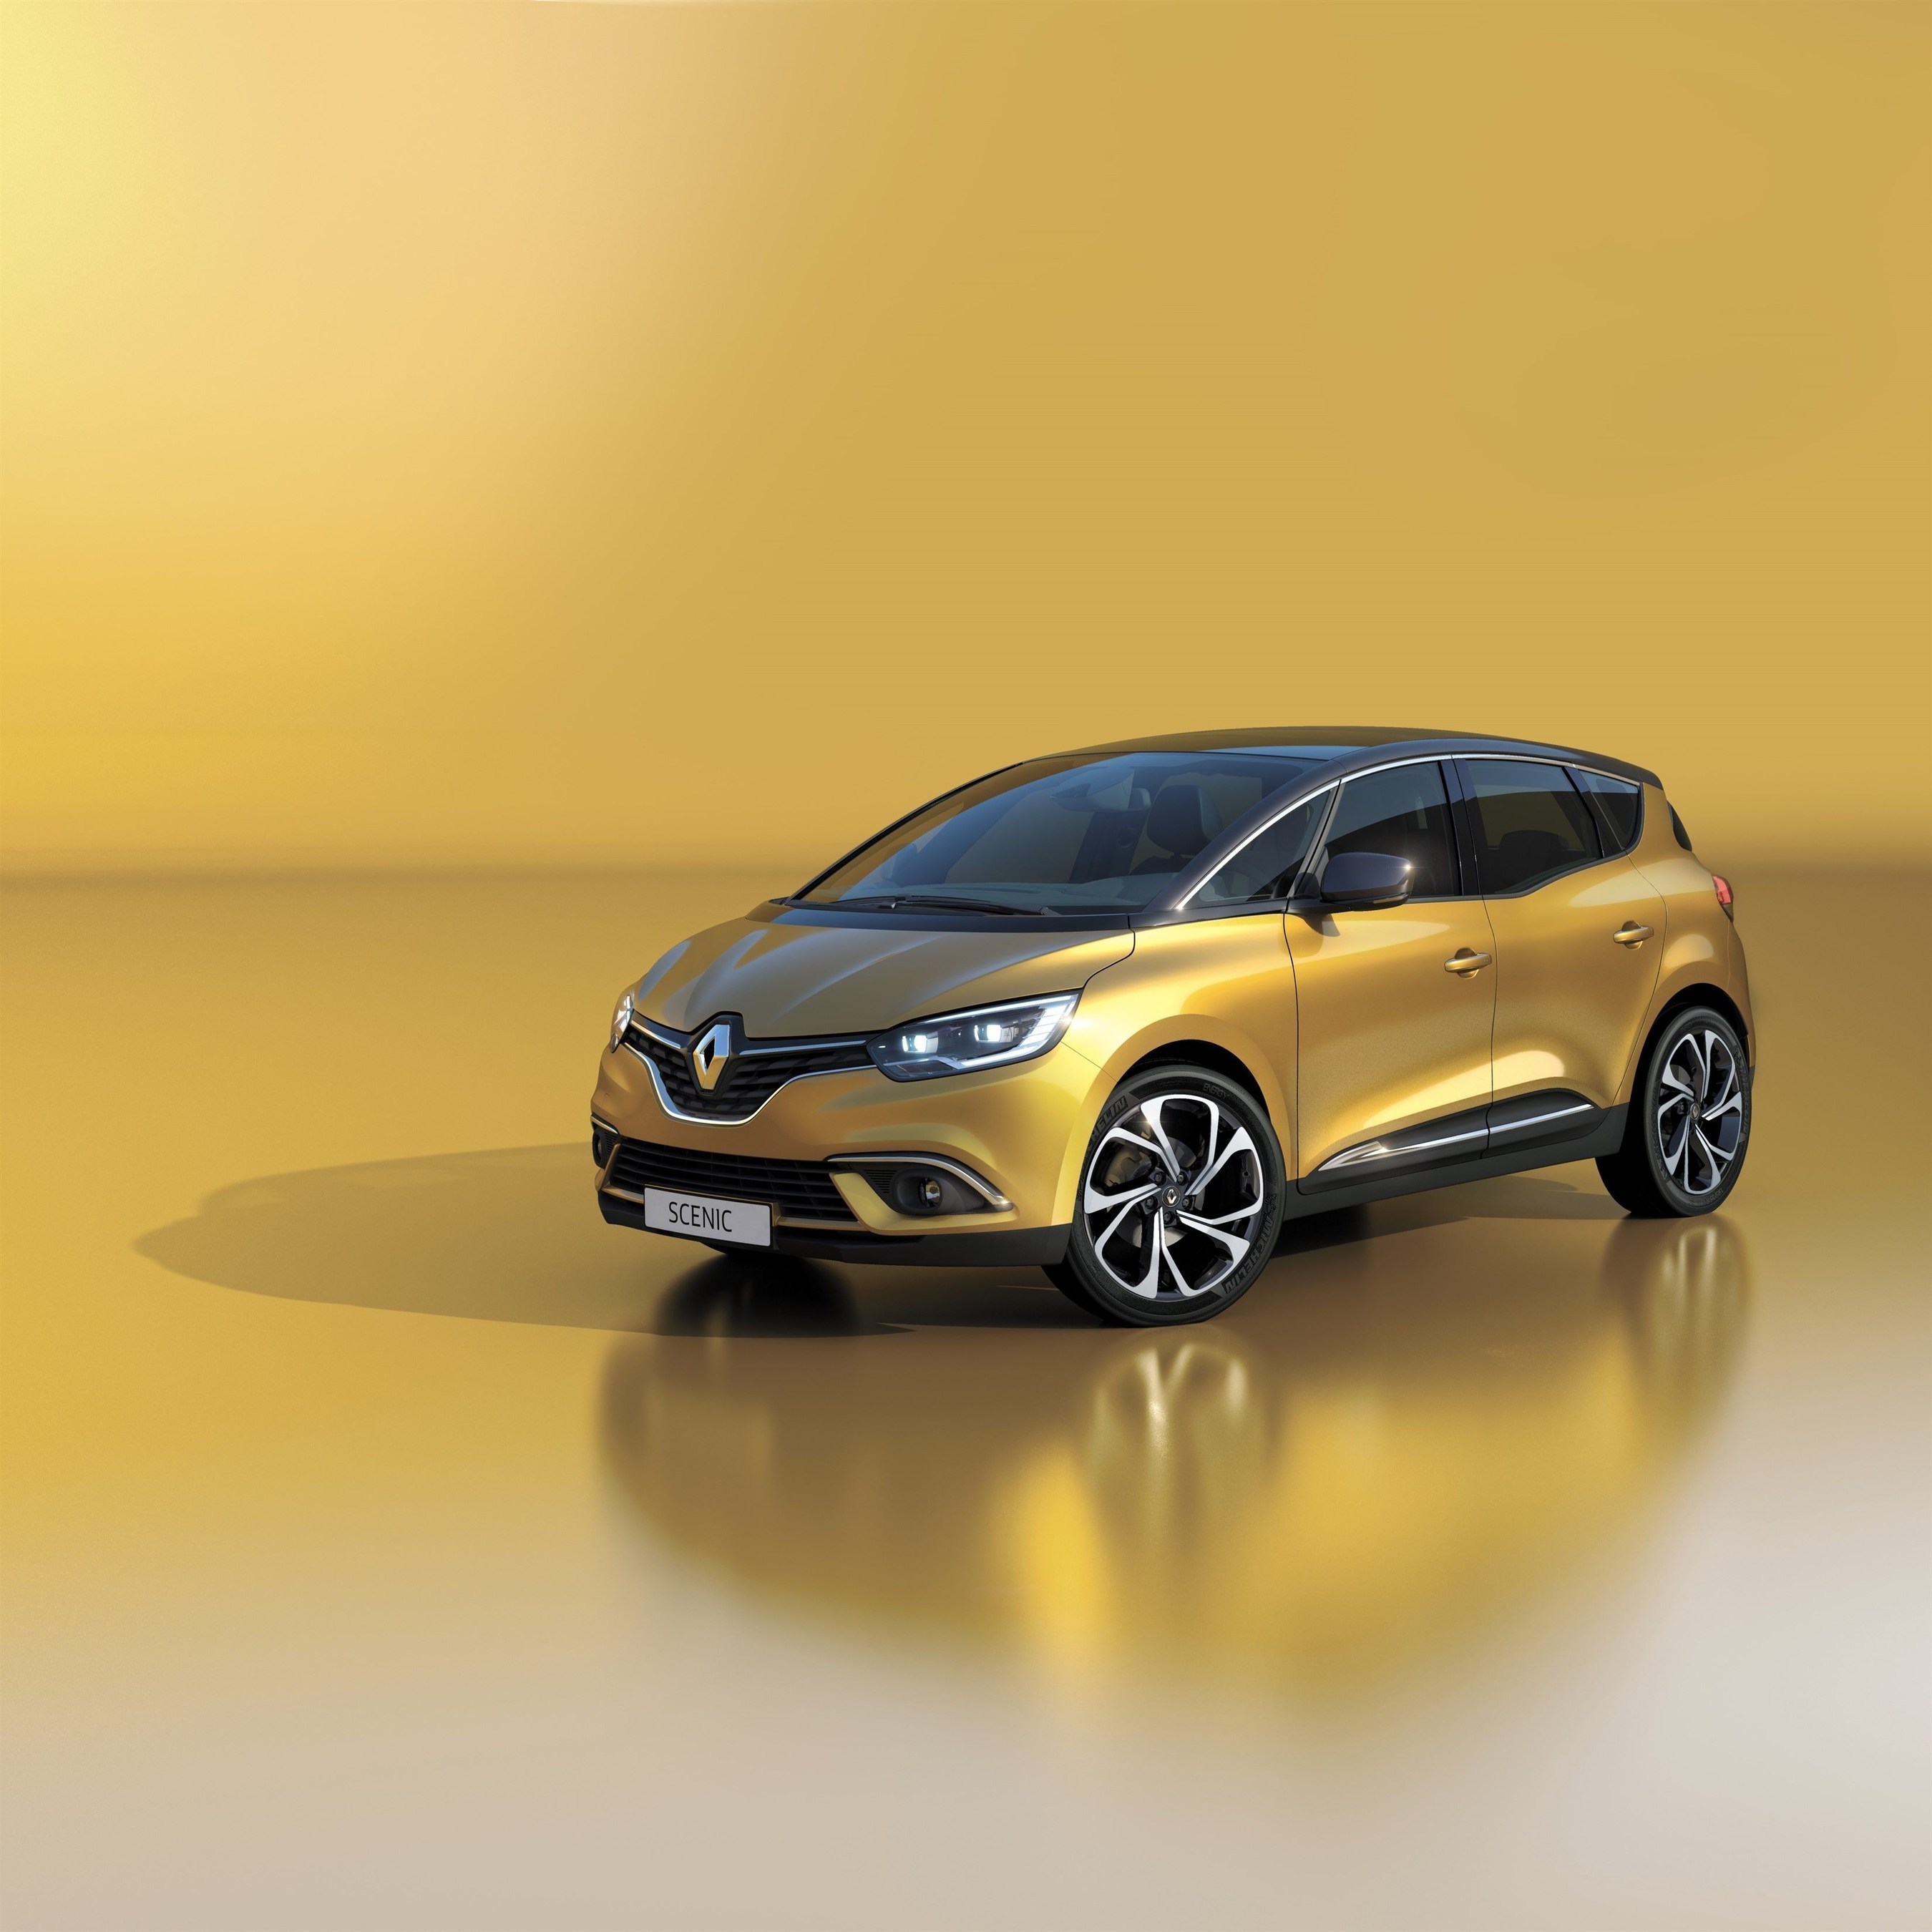 Renault unveiled the new SCENIC on its 20th anniversary after creating the compact MPV segment (PRNewsFoto/Groupe Renault) (PRNewsFoto/Groupe Renault)